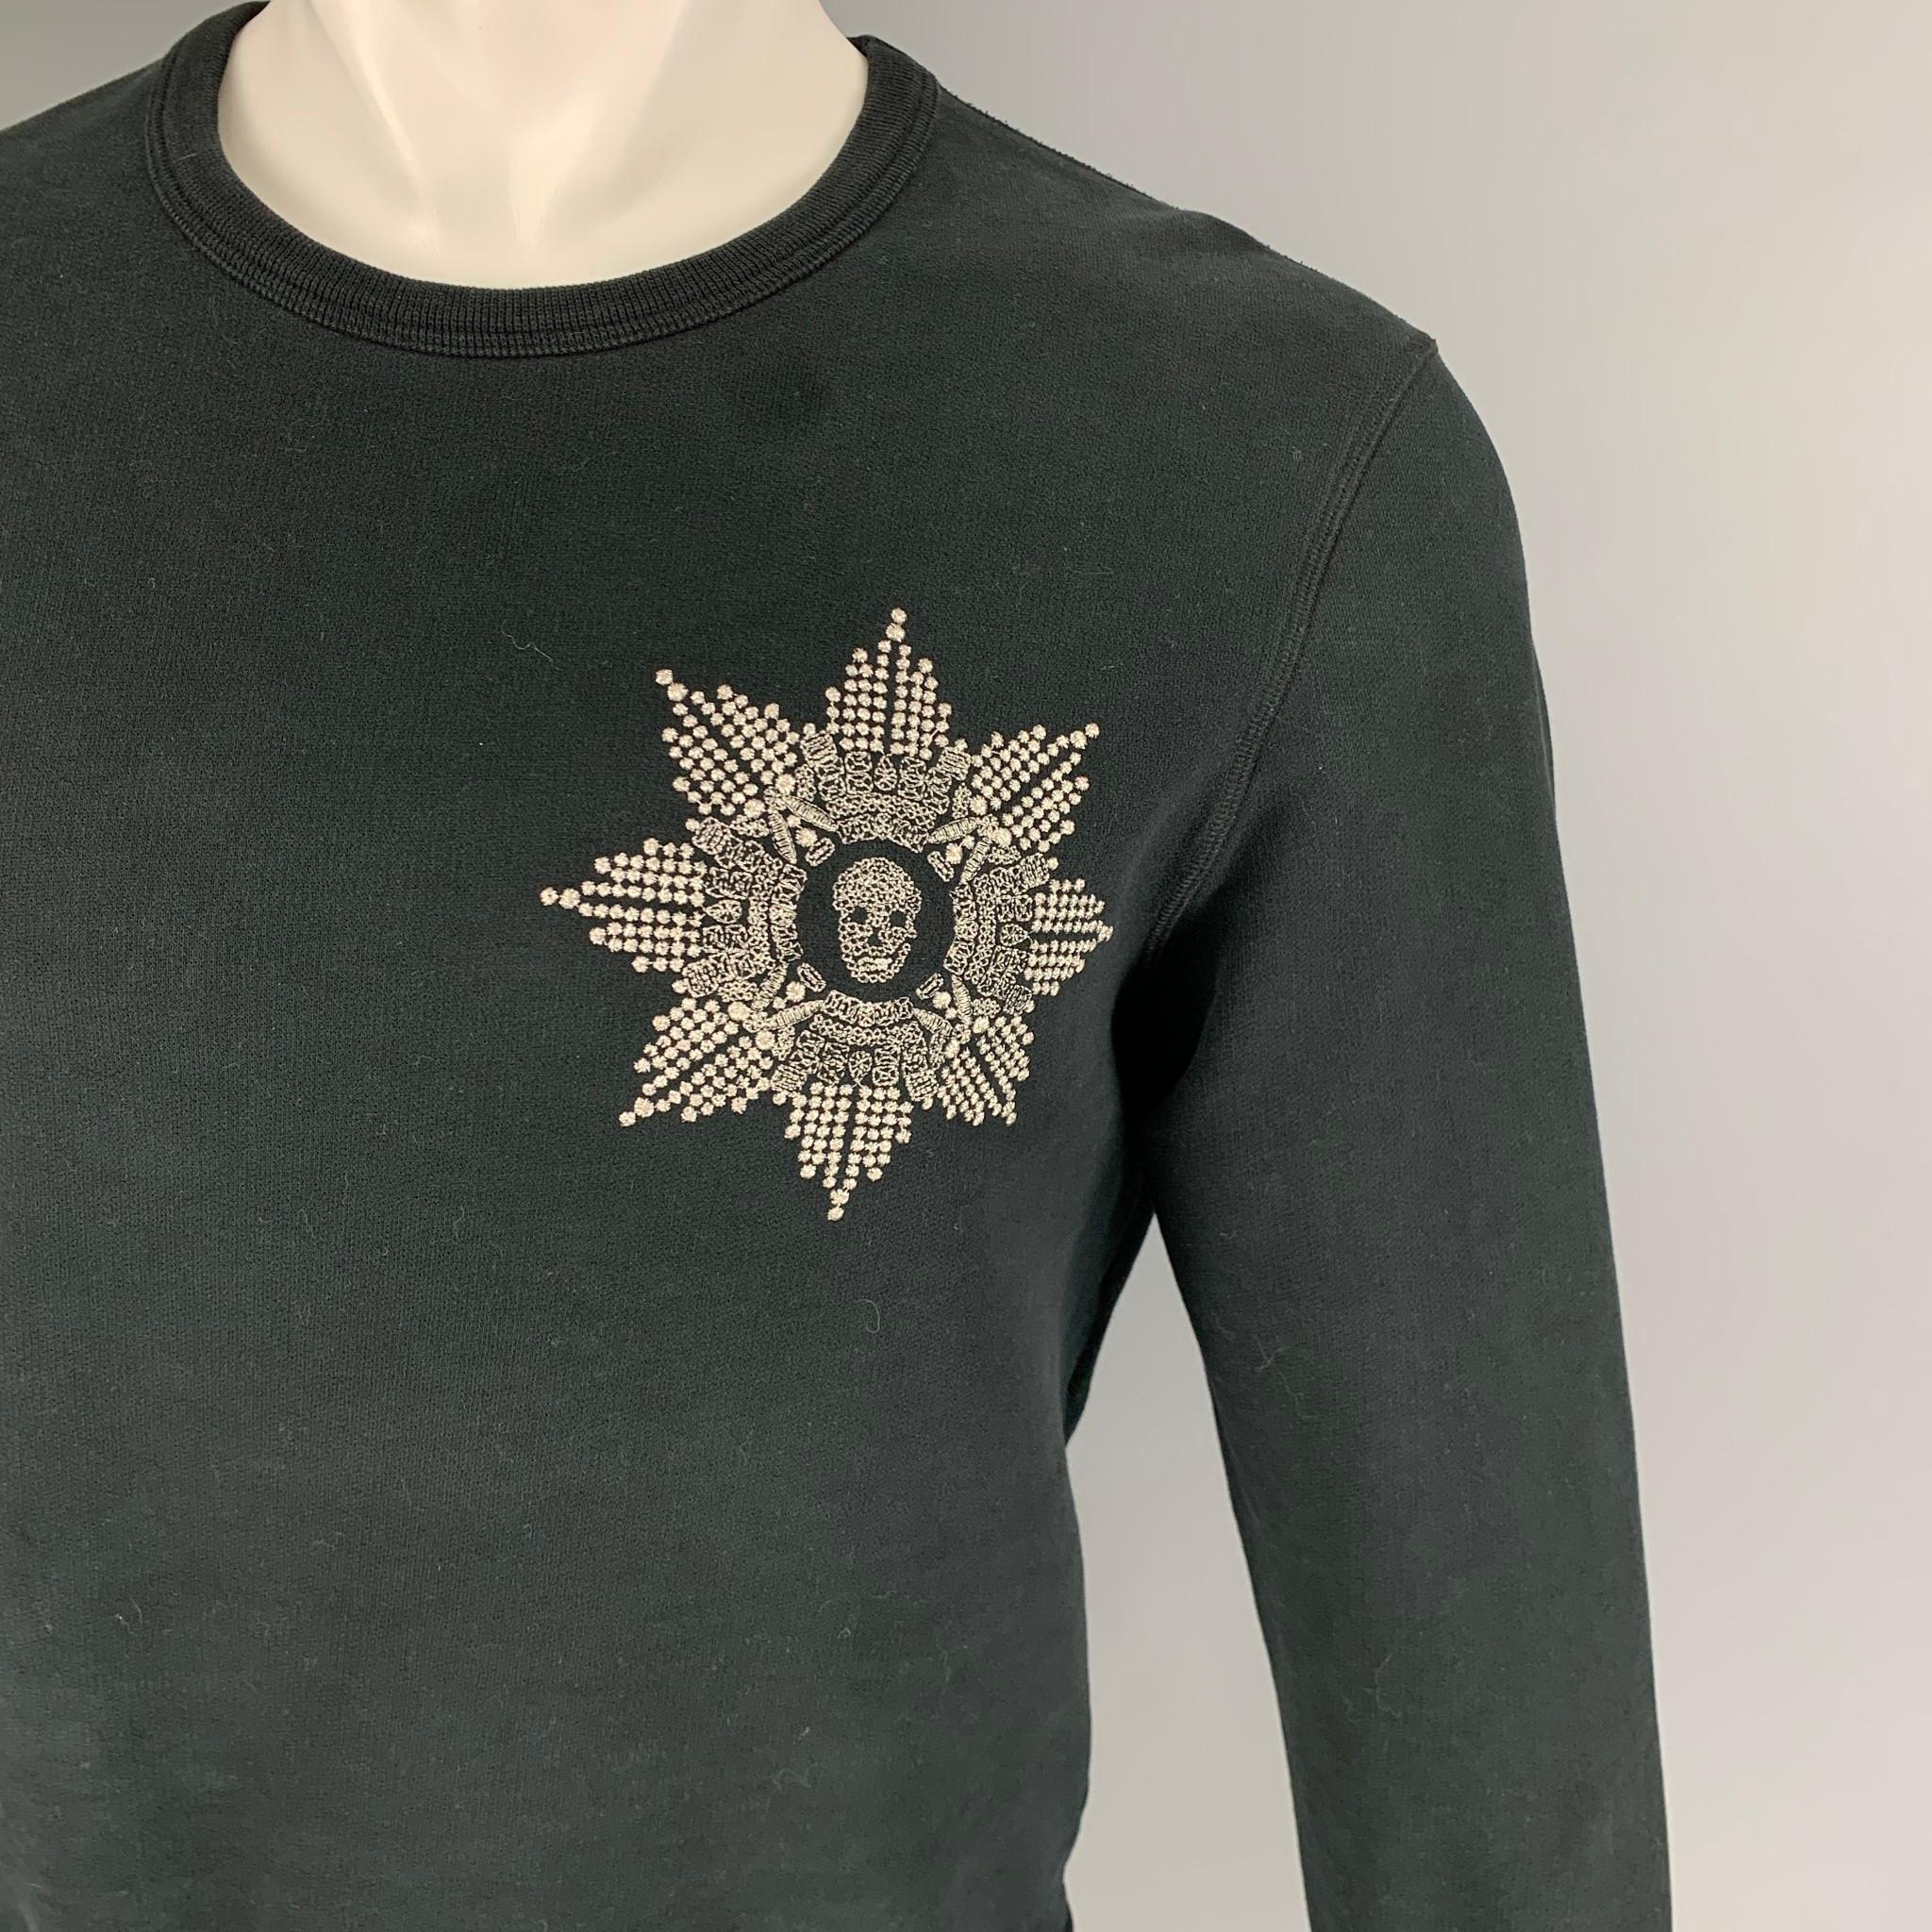 ALEXANDER McQUEEN pullover comes in a black cotton featuring a silver embroidered skull patch and a crew-neck. Made in Italy. 

Very Good Pre-Owned Condition. Light wear at front.
Marked: M

Measurements:

Shoulder: 19 in.
Chest: 40 in.
Sleeve: 26